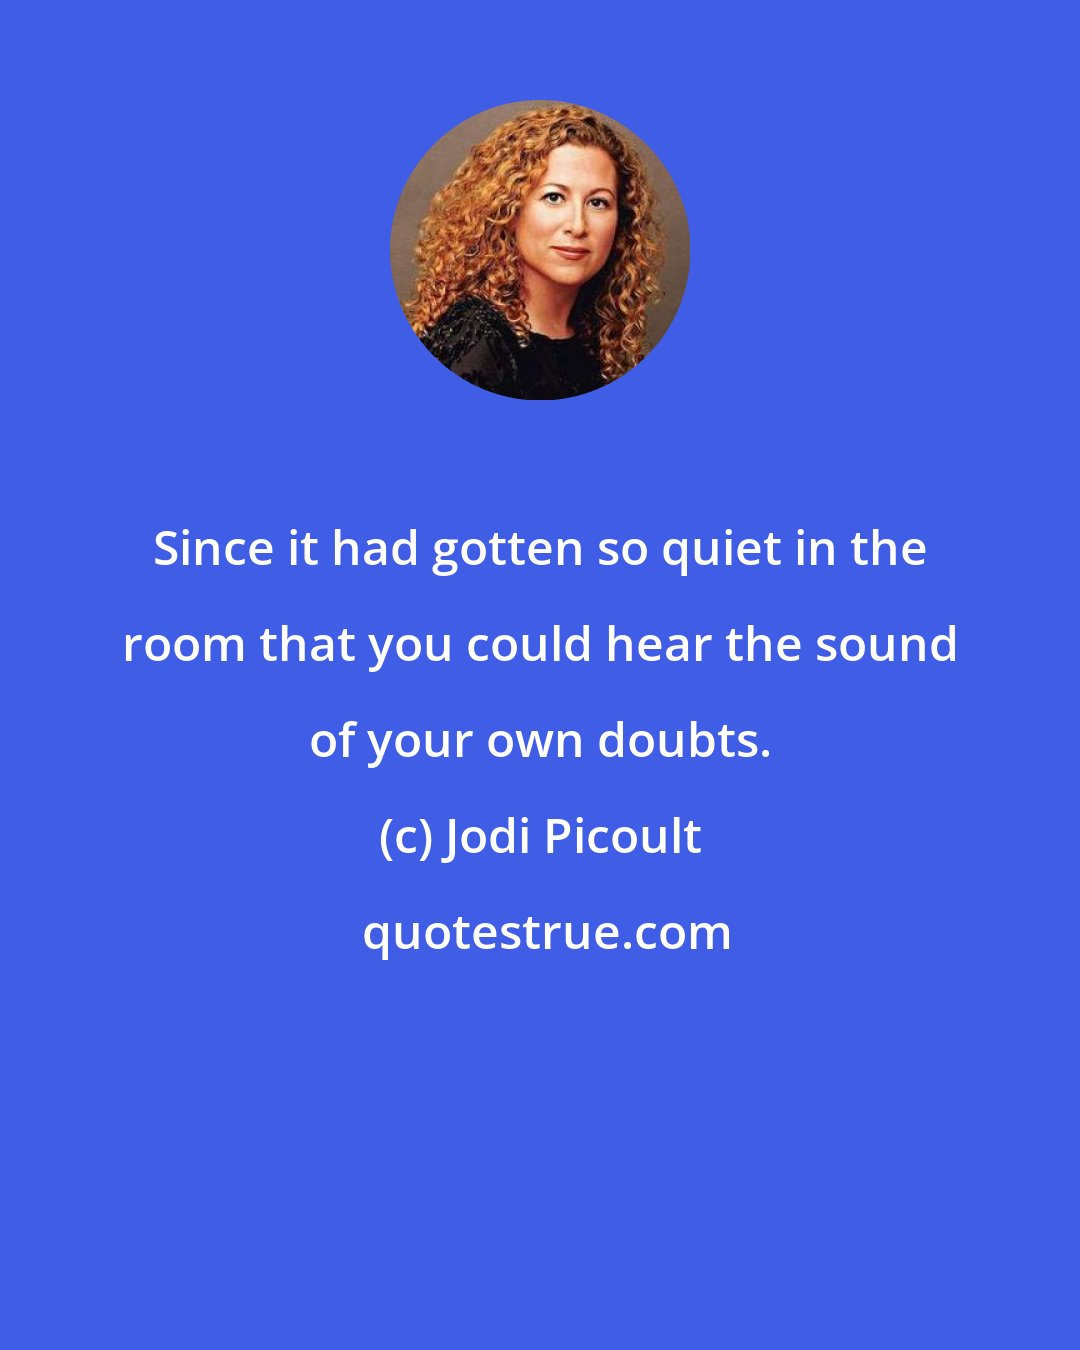 Jodi Picoult: Since it had gotten so quiet in the room that you could hear the sound of your own doubts.